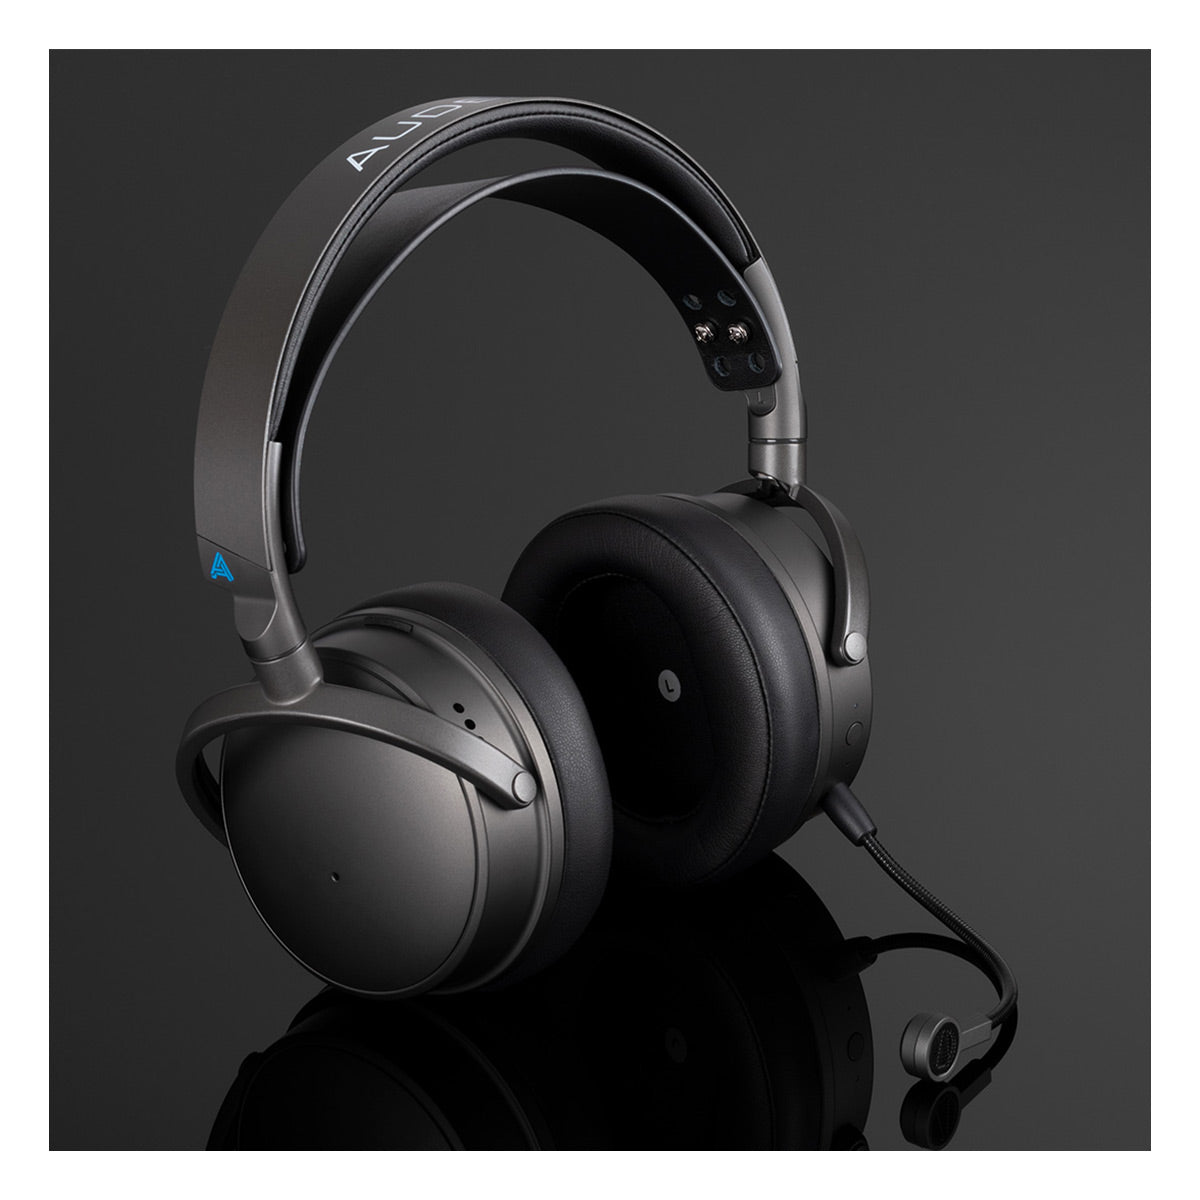 Audeze Maxwell Wireless Gaming Headset for Playstation, Windows, macOS, Android, iOS, and Nintendo Switch with Tempest 3D Audio